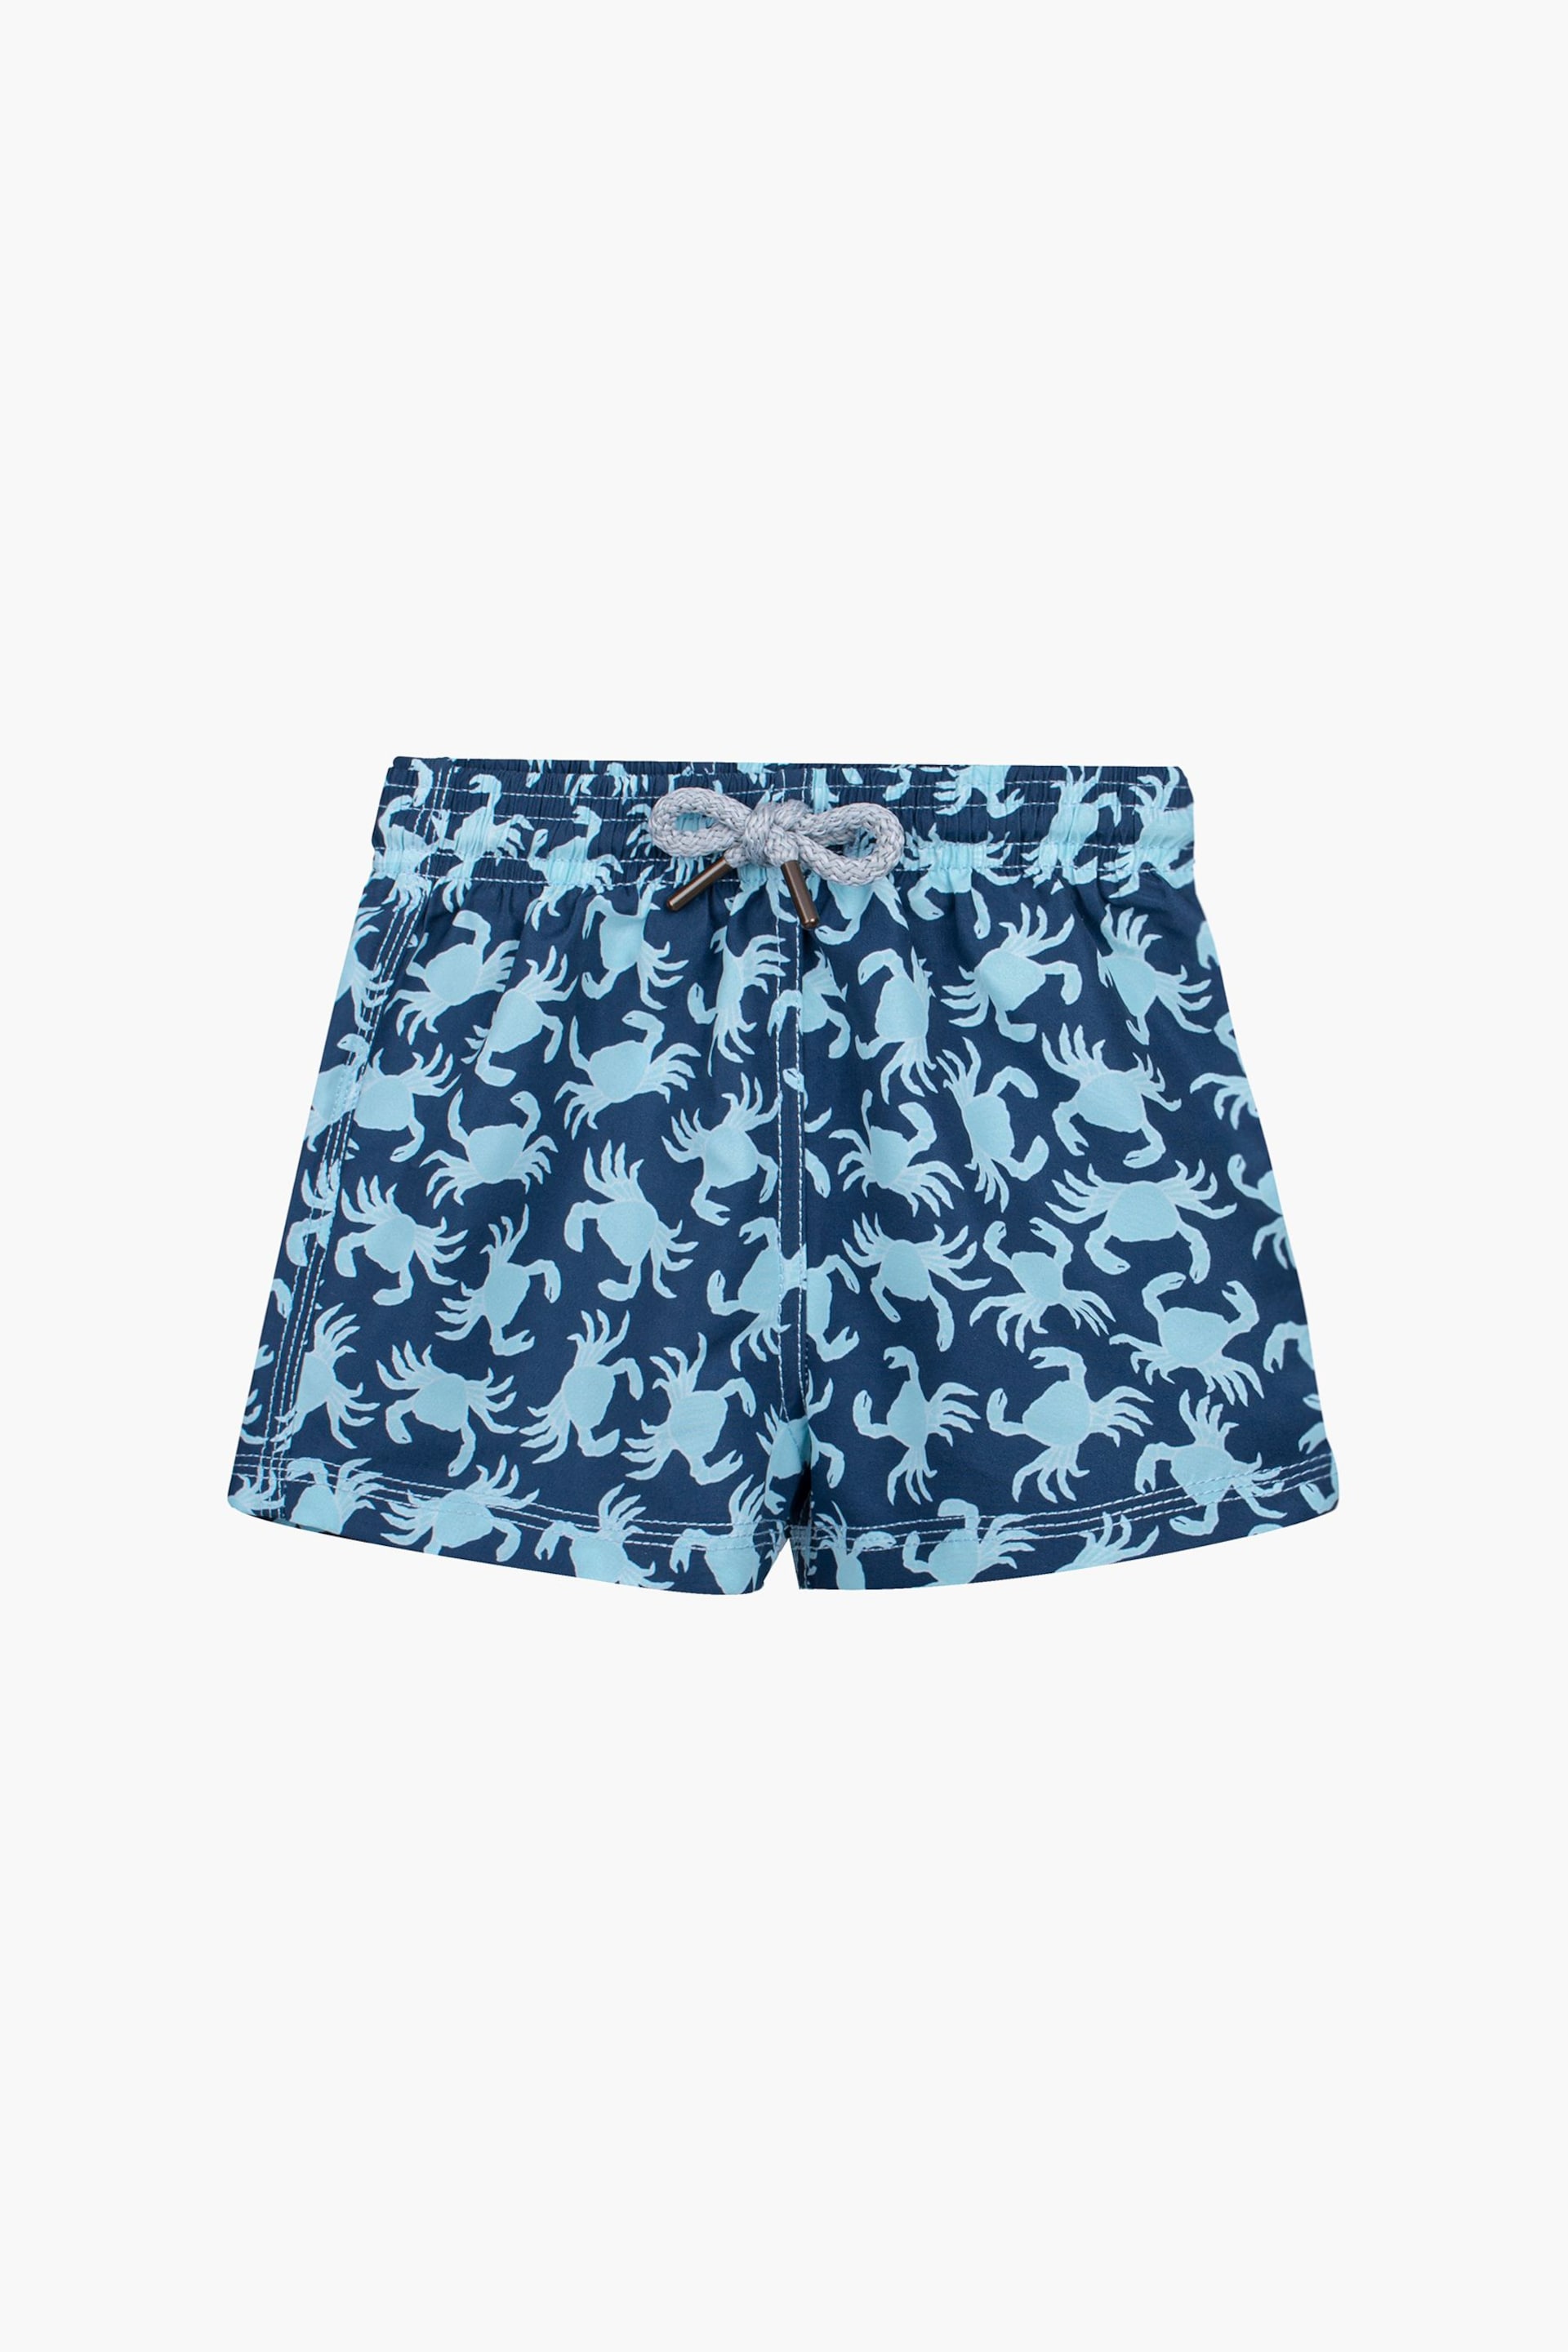 Trotters London Blue Little Crab Swimshorts - Image 1 of 3